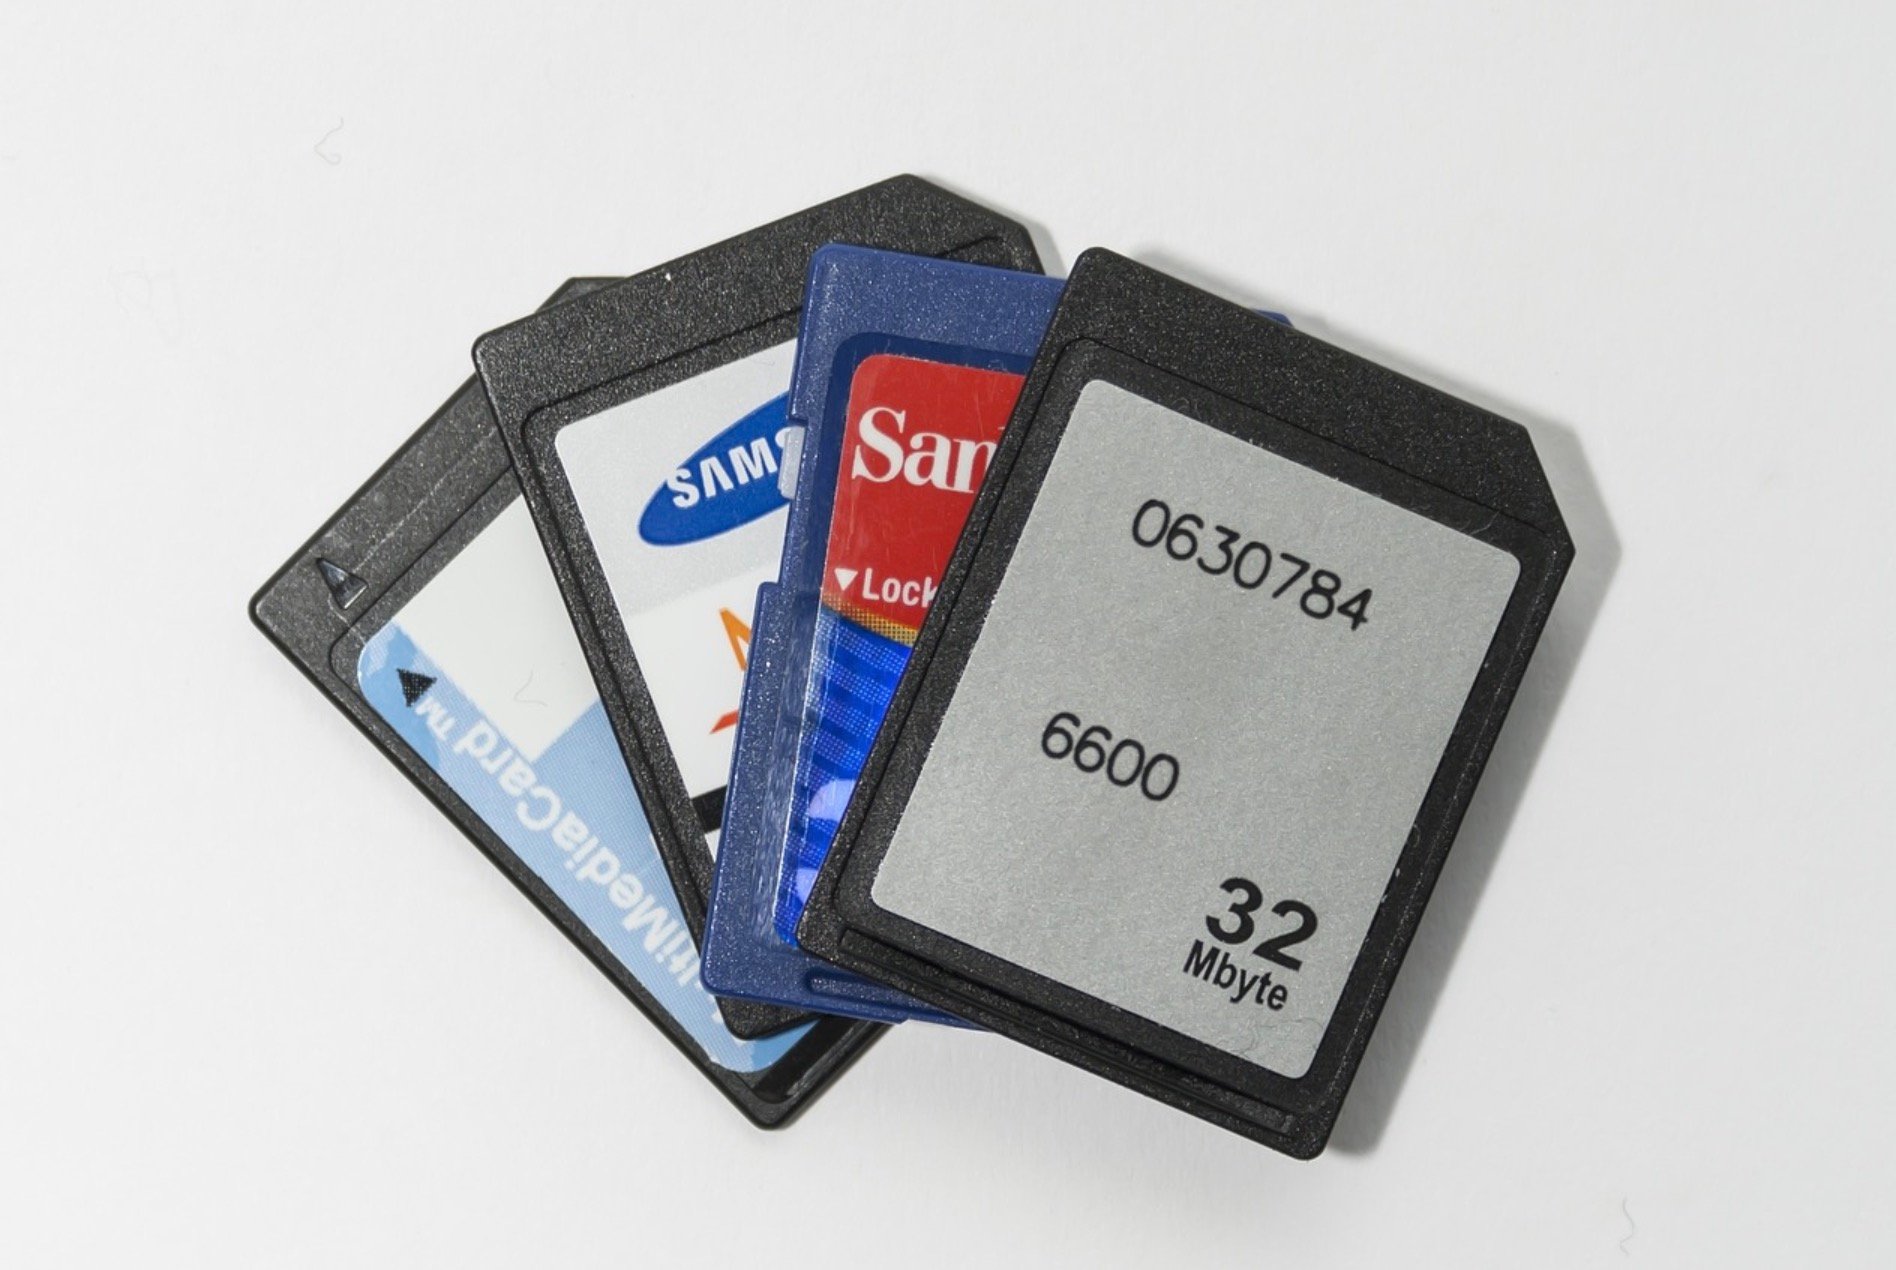 Sd Card Vs Ssd Is There Really A Difference Market Business News